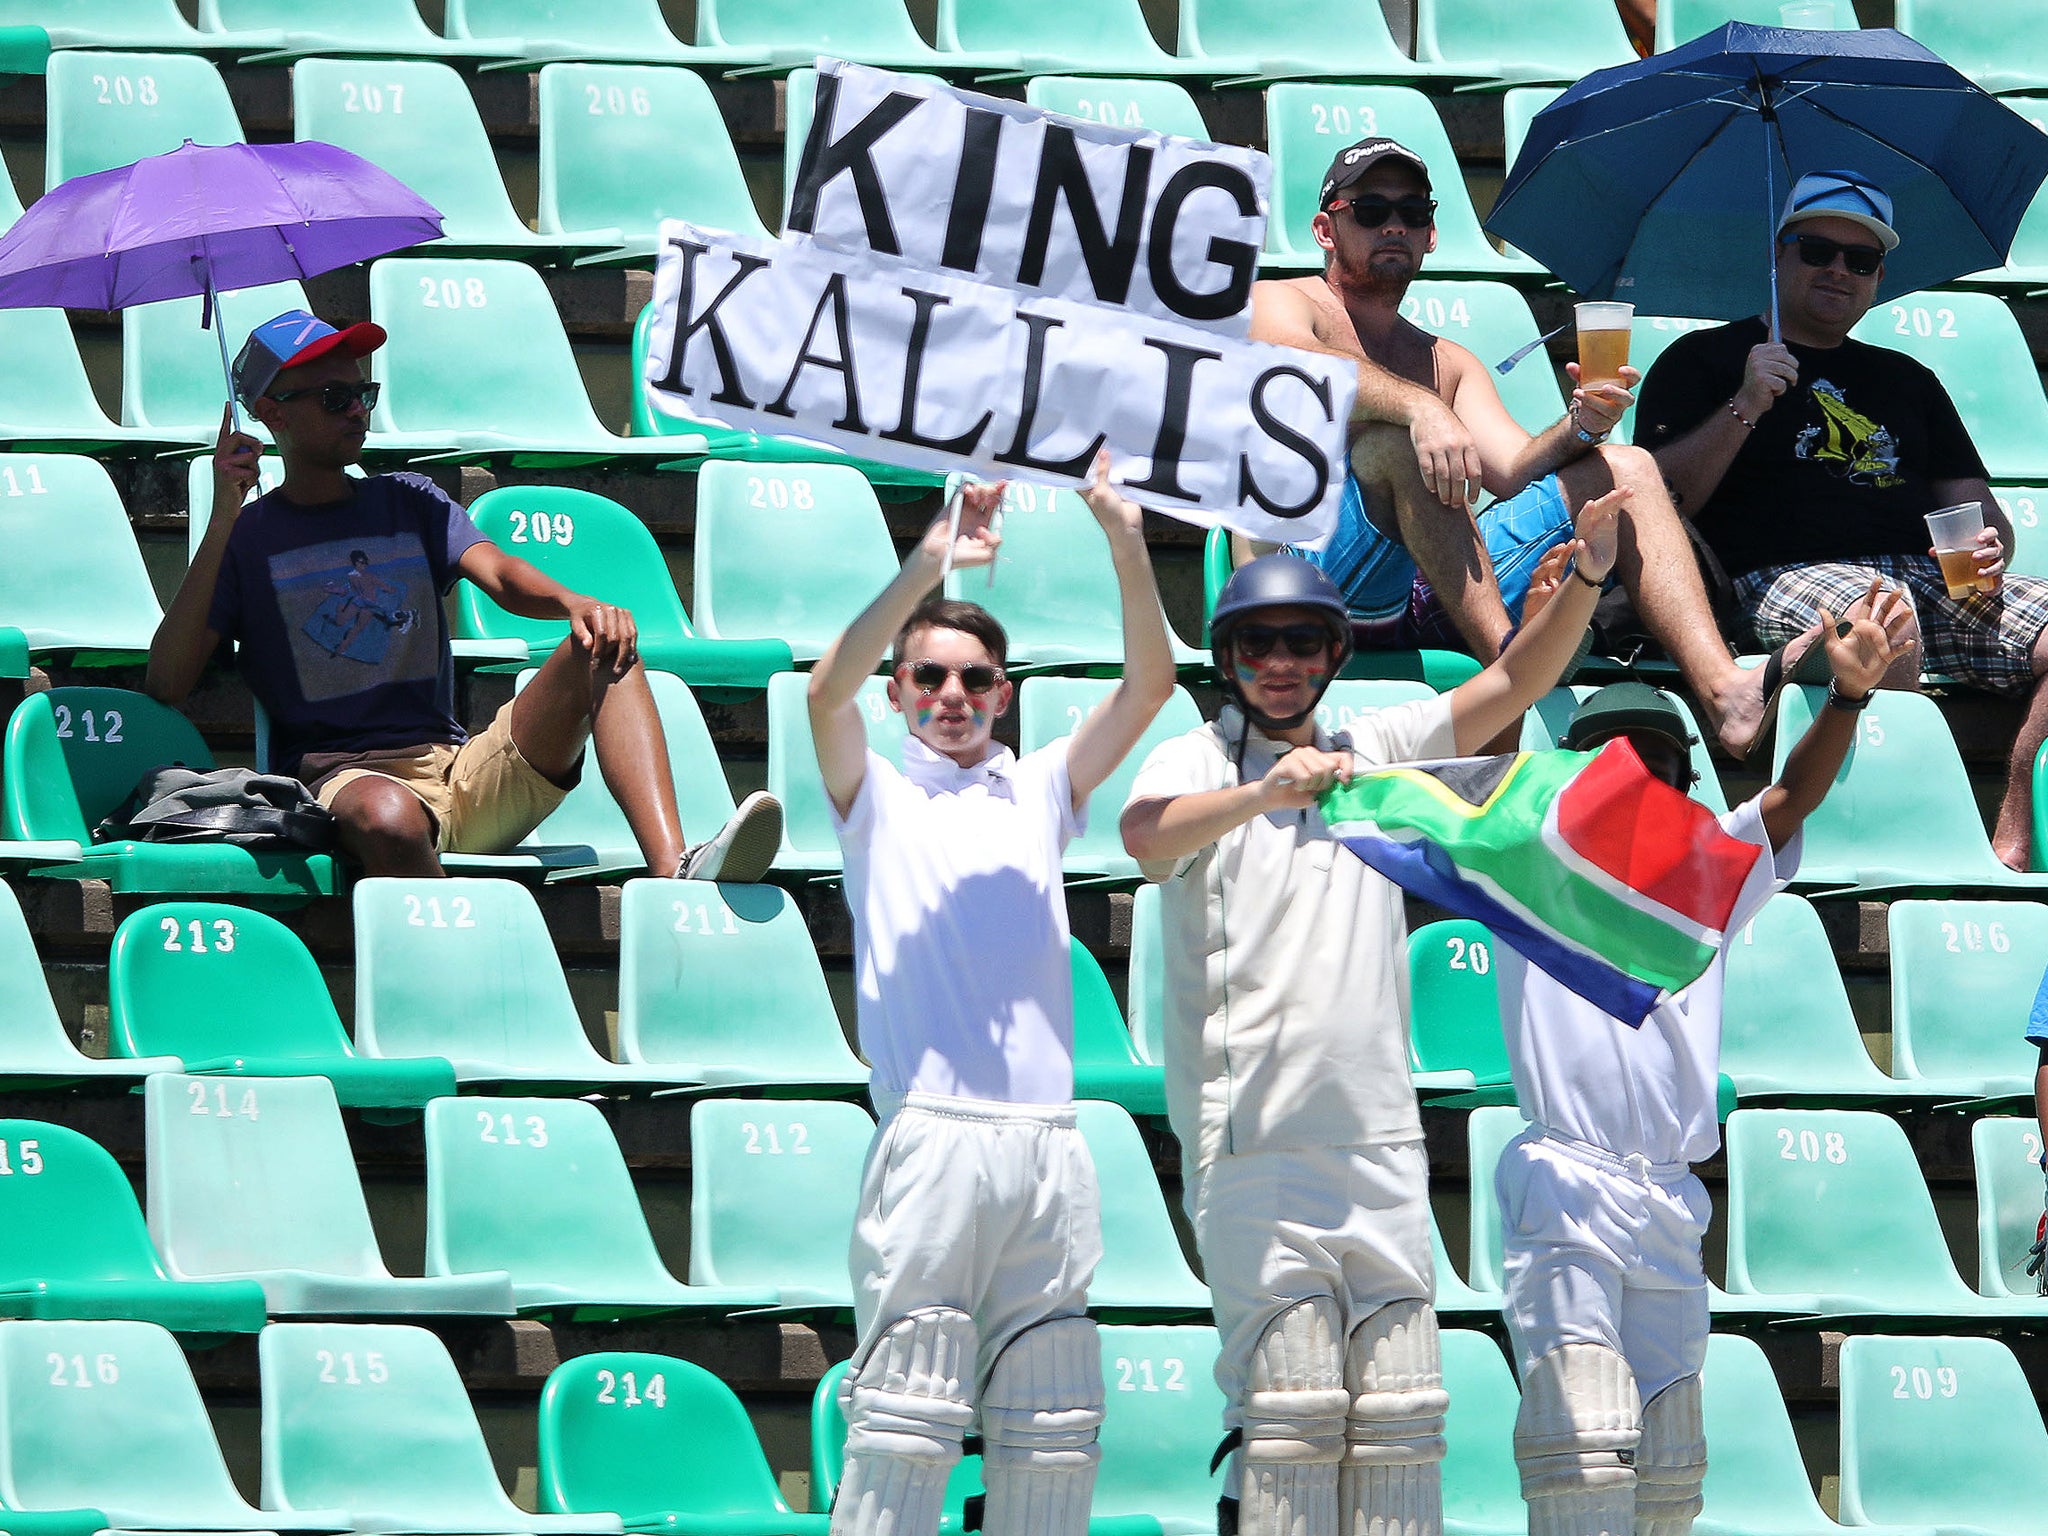 A supporter of South Africa holds a placard supporting Jacques Kallis during the fifth day of the second and final Test match between South Africa and India. They were among the few supporters who turned up